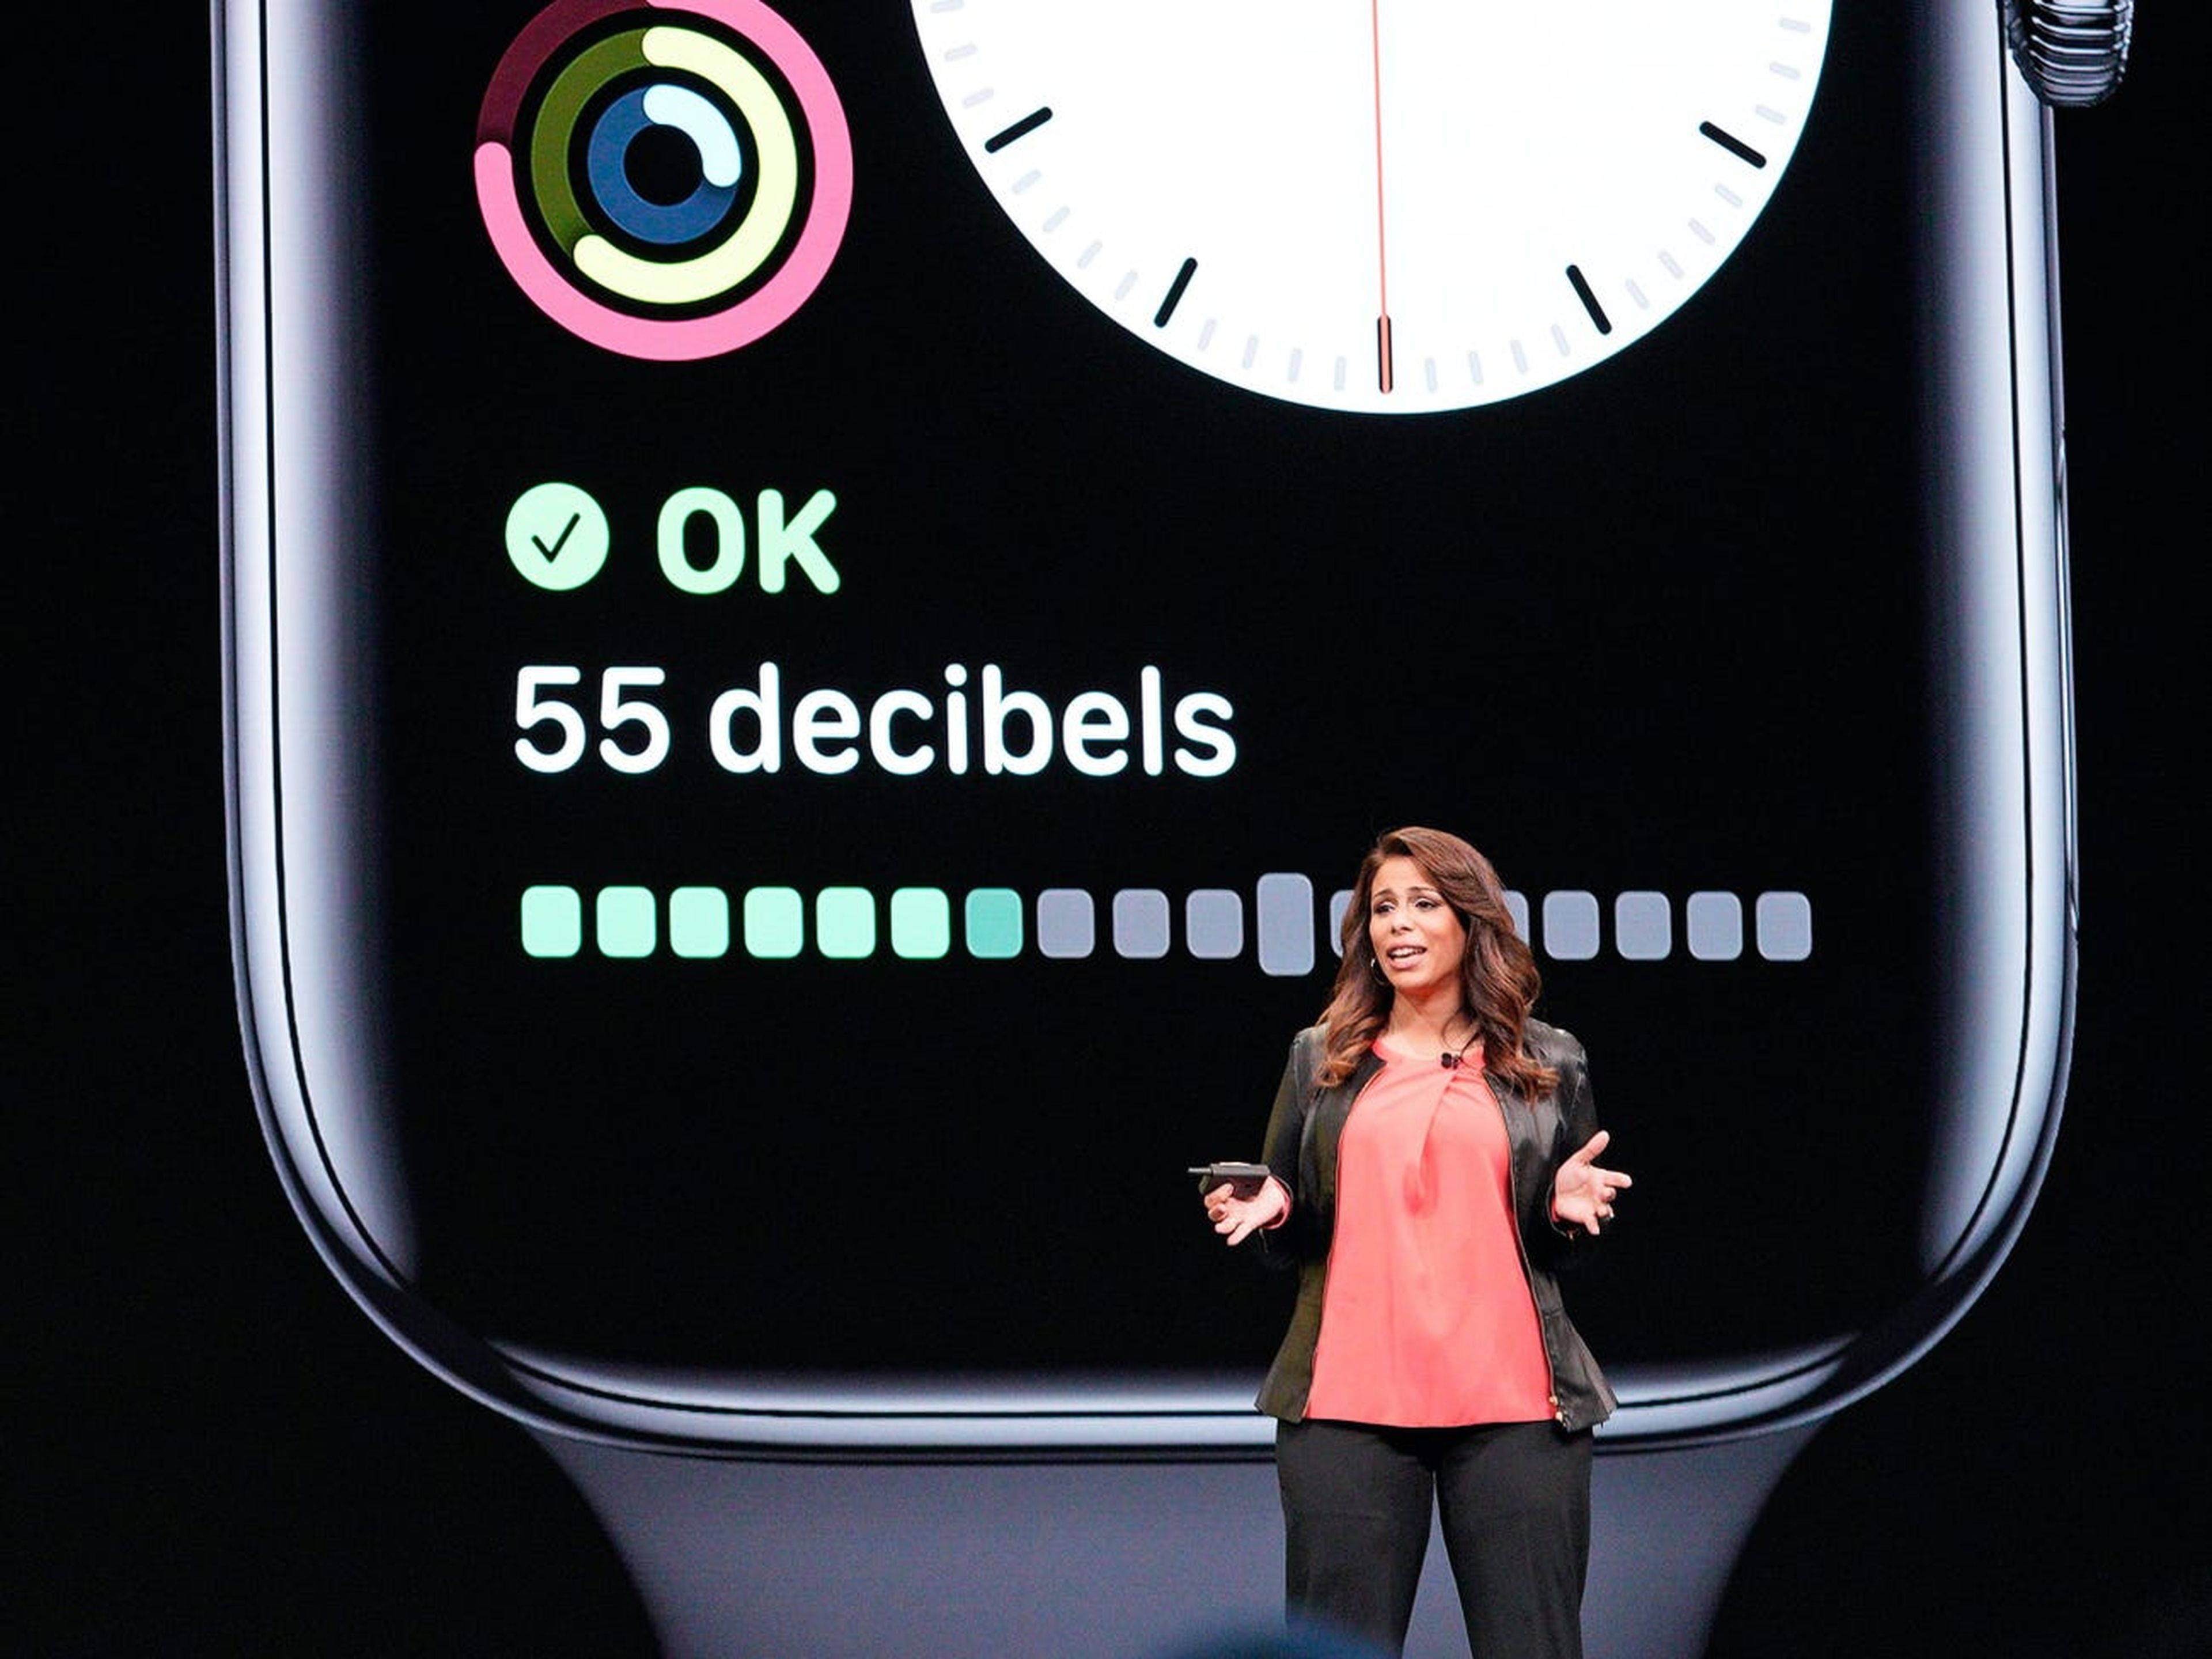 Dr. Sumbul Desai, a vice president of health at Apple, speaks during Apple's developers conference in 2019.